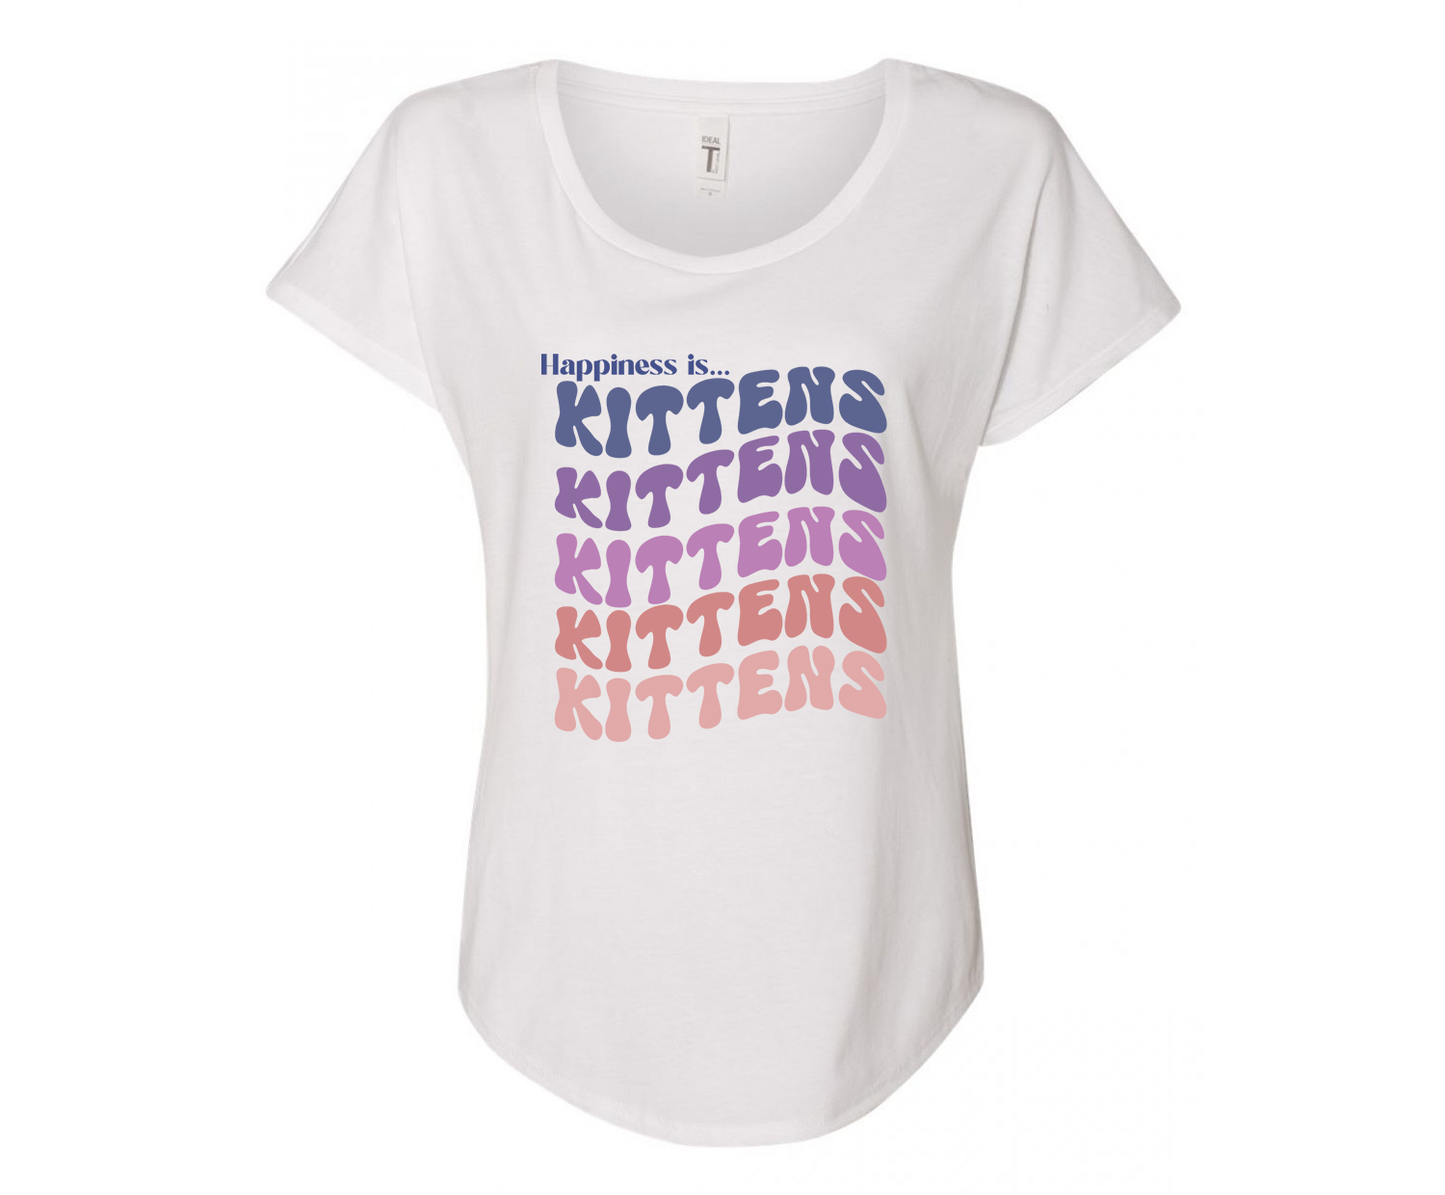 Happiness is Kittens Ladies Tee Shirt - In White & Grey